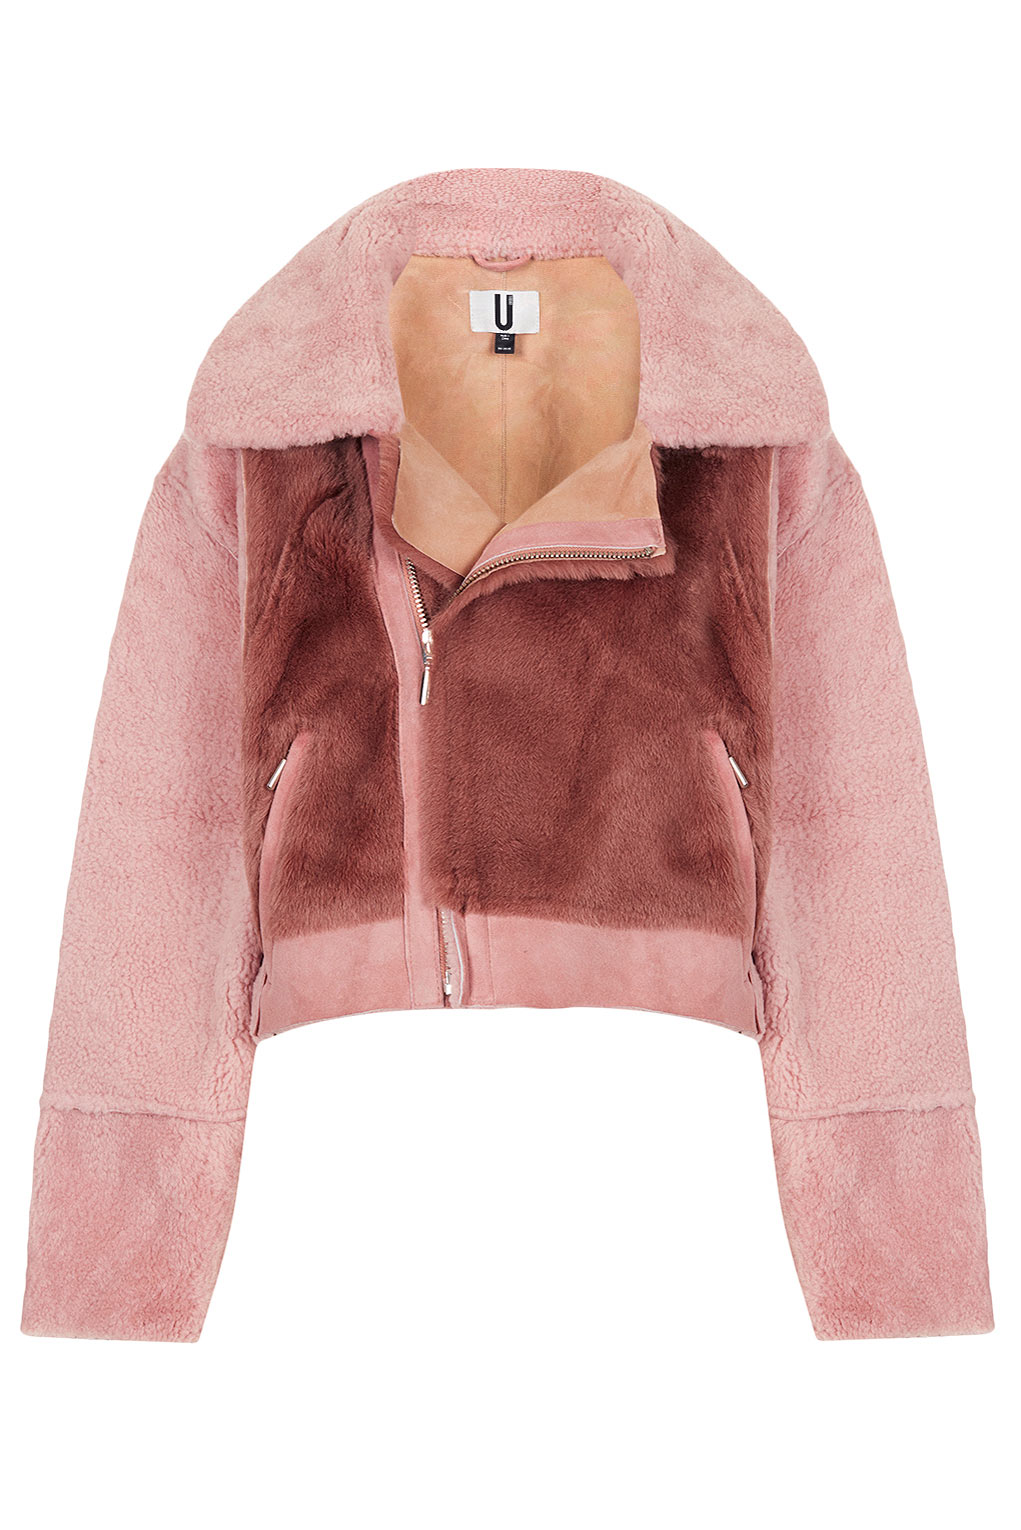 TOPSHOP Shearling Bomber Jacket By Unique in Blush (Pink) - Lyst